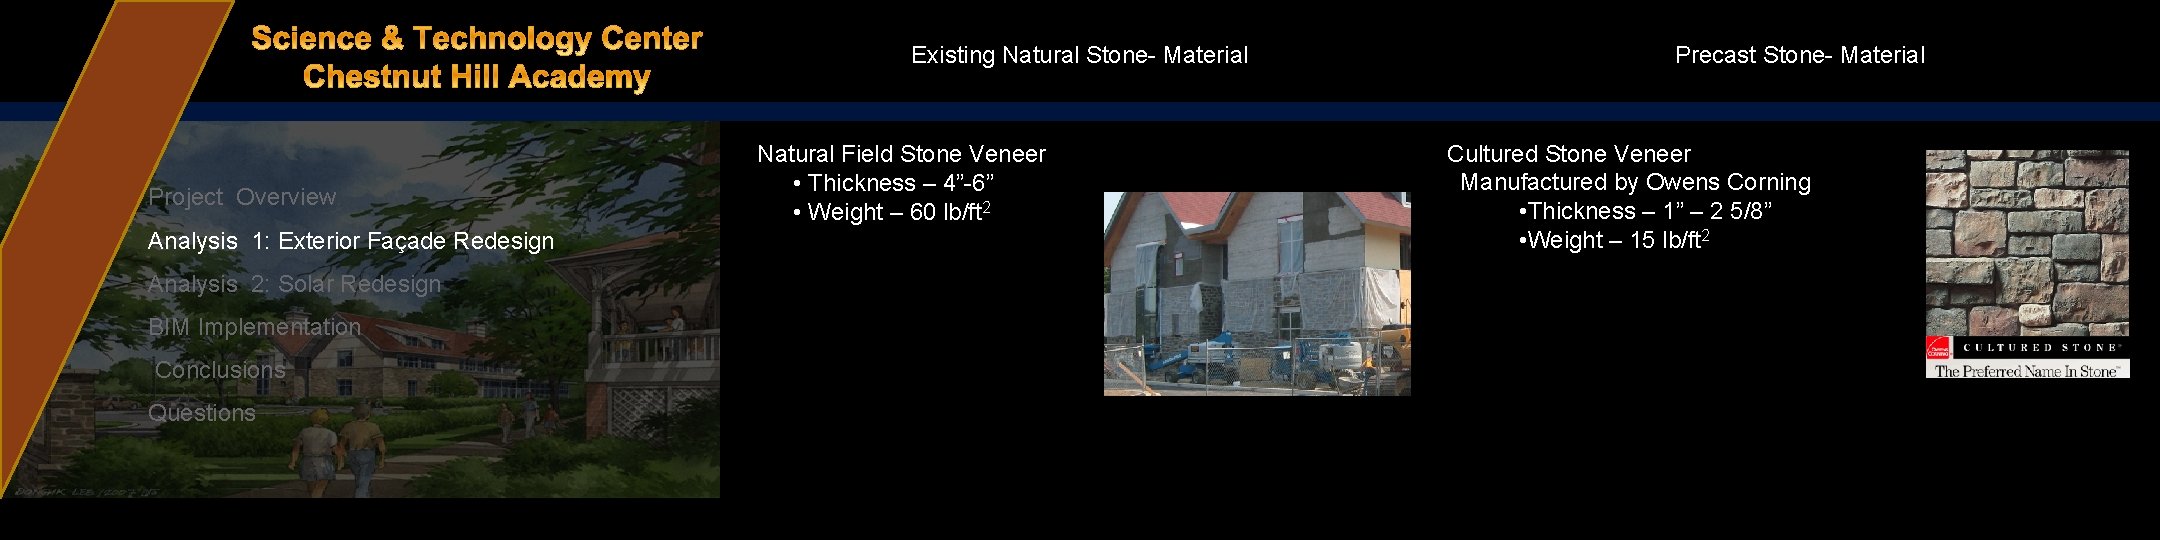 Existing Natural Stone- Material Project Overview Analysis 1: Exterior Façade Redesign Analysis 2: Solar